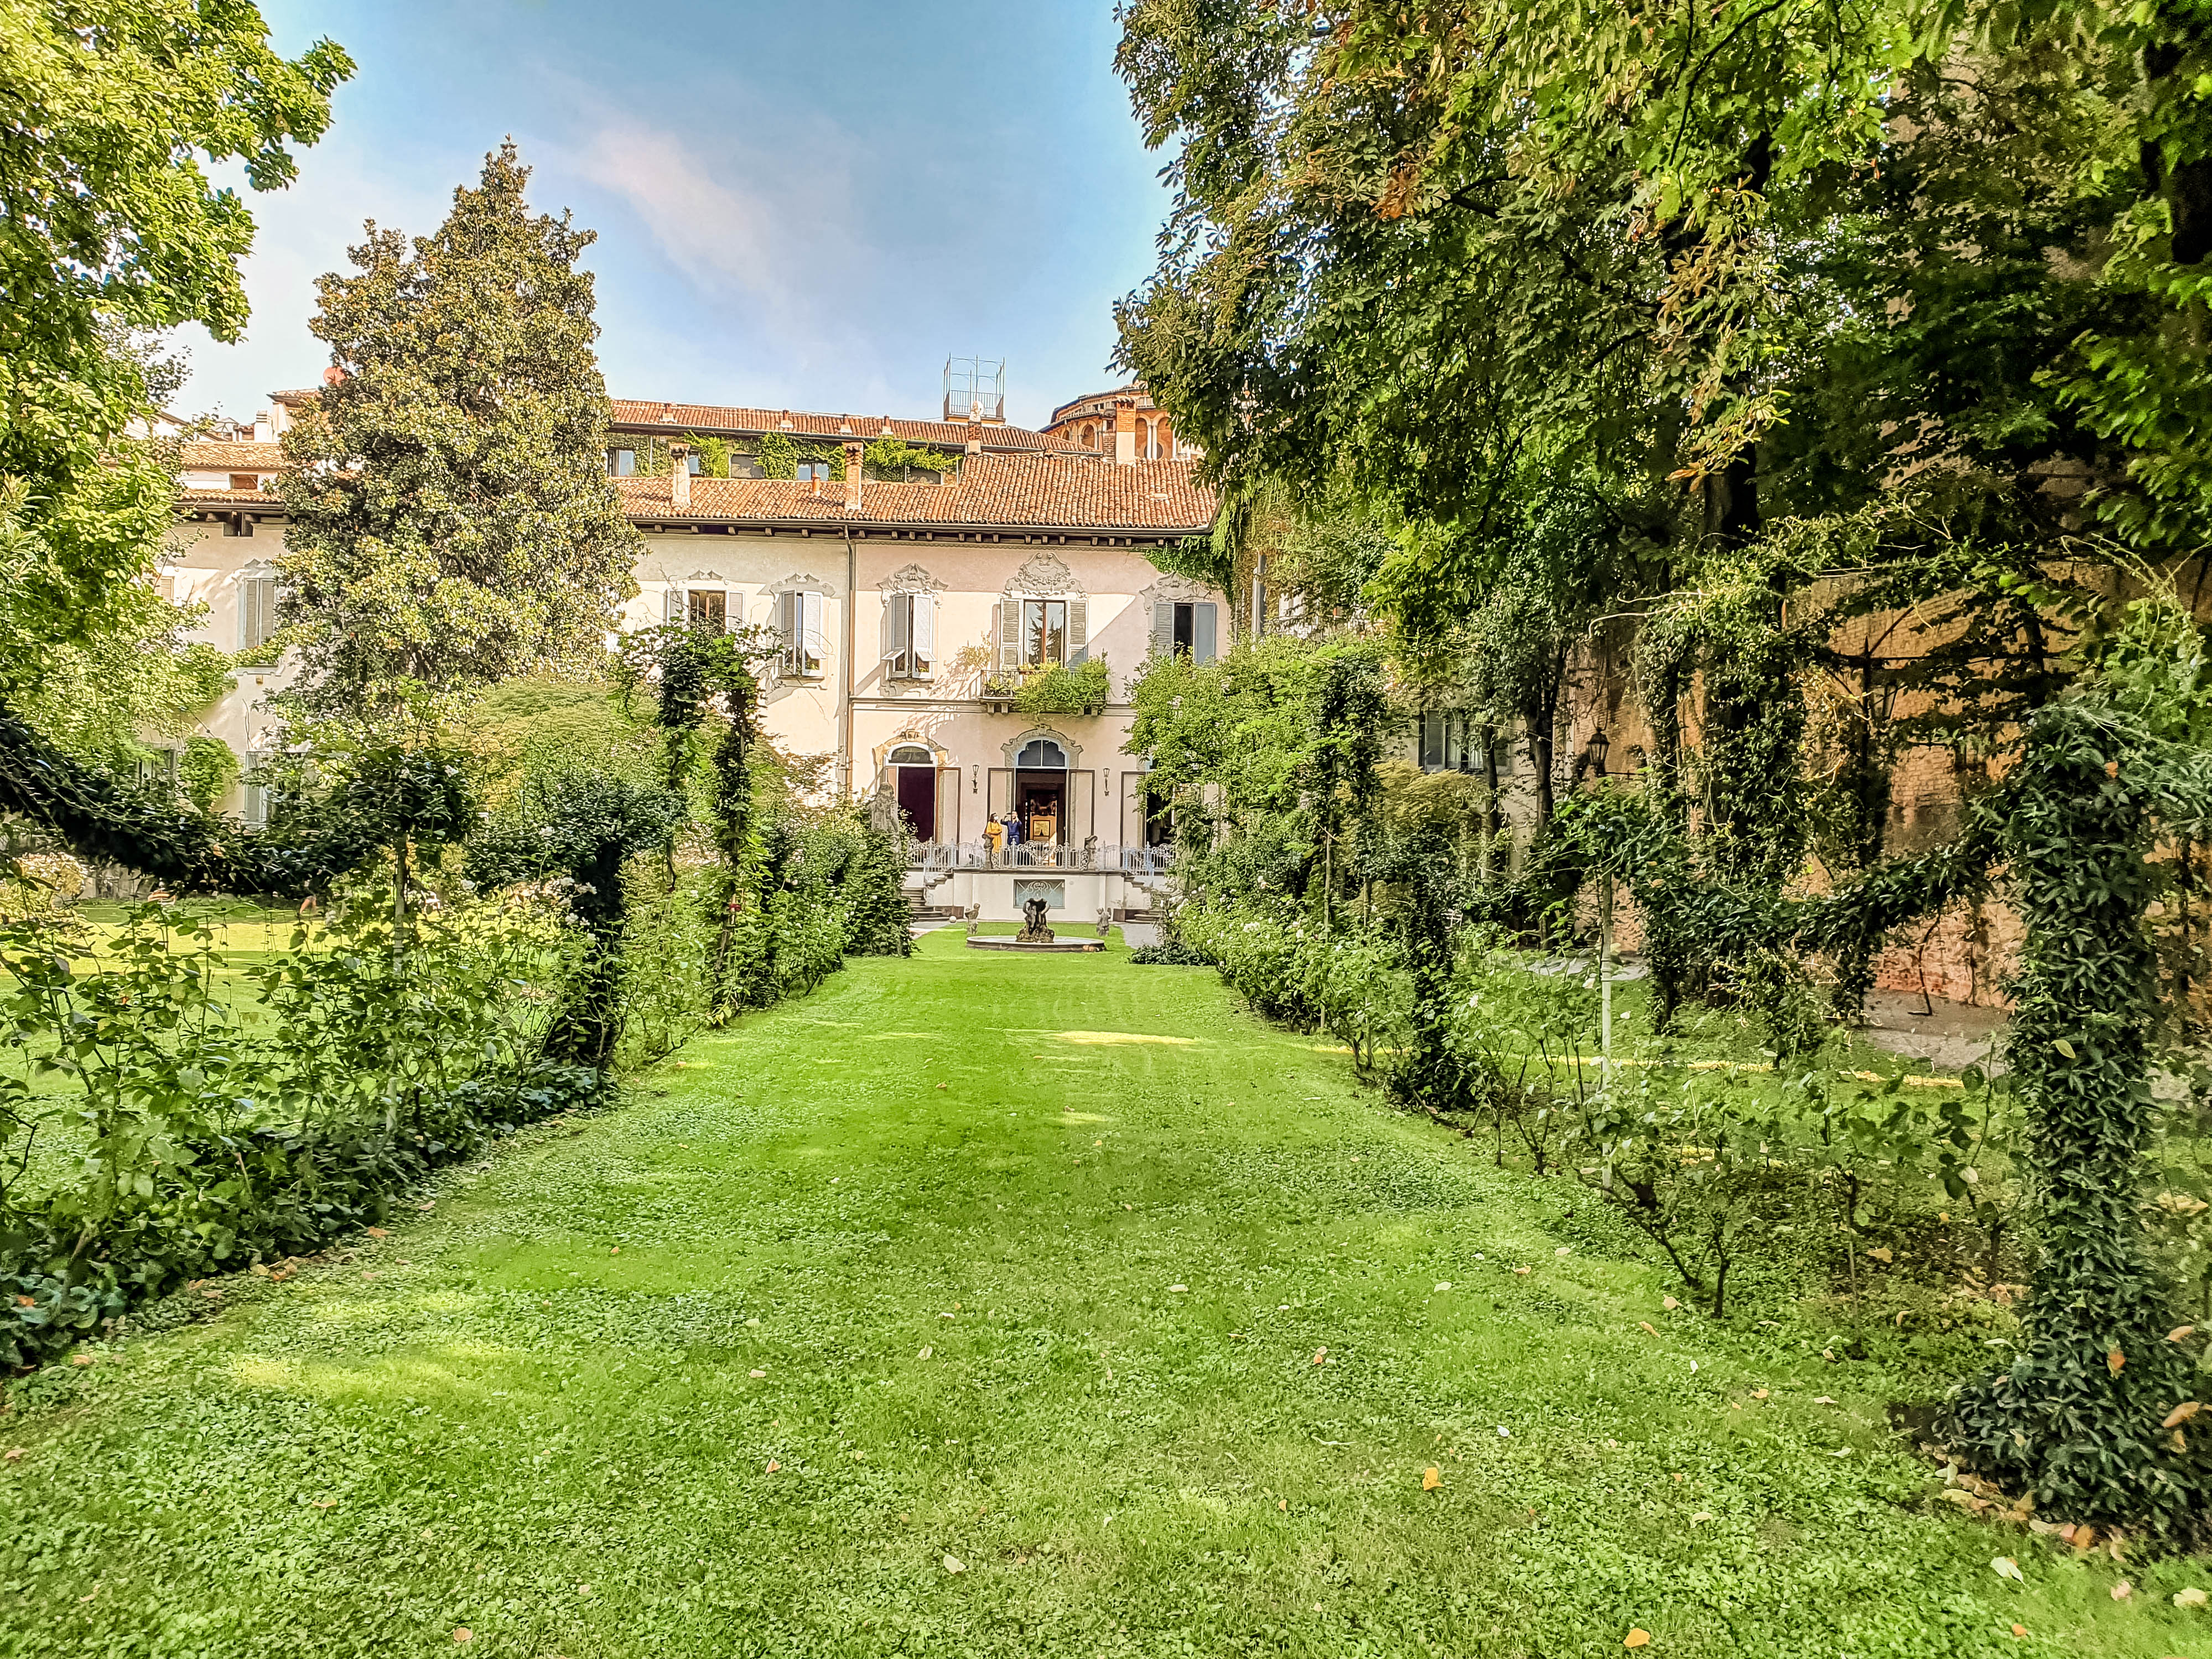 One of the many hidden gems in Milan. A beautiful house sits at the end of a sprawling green garden.